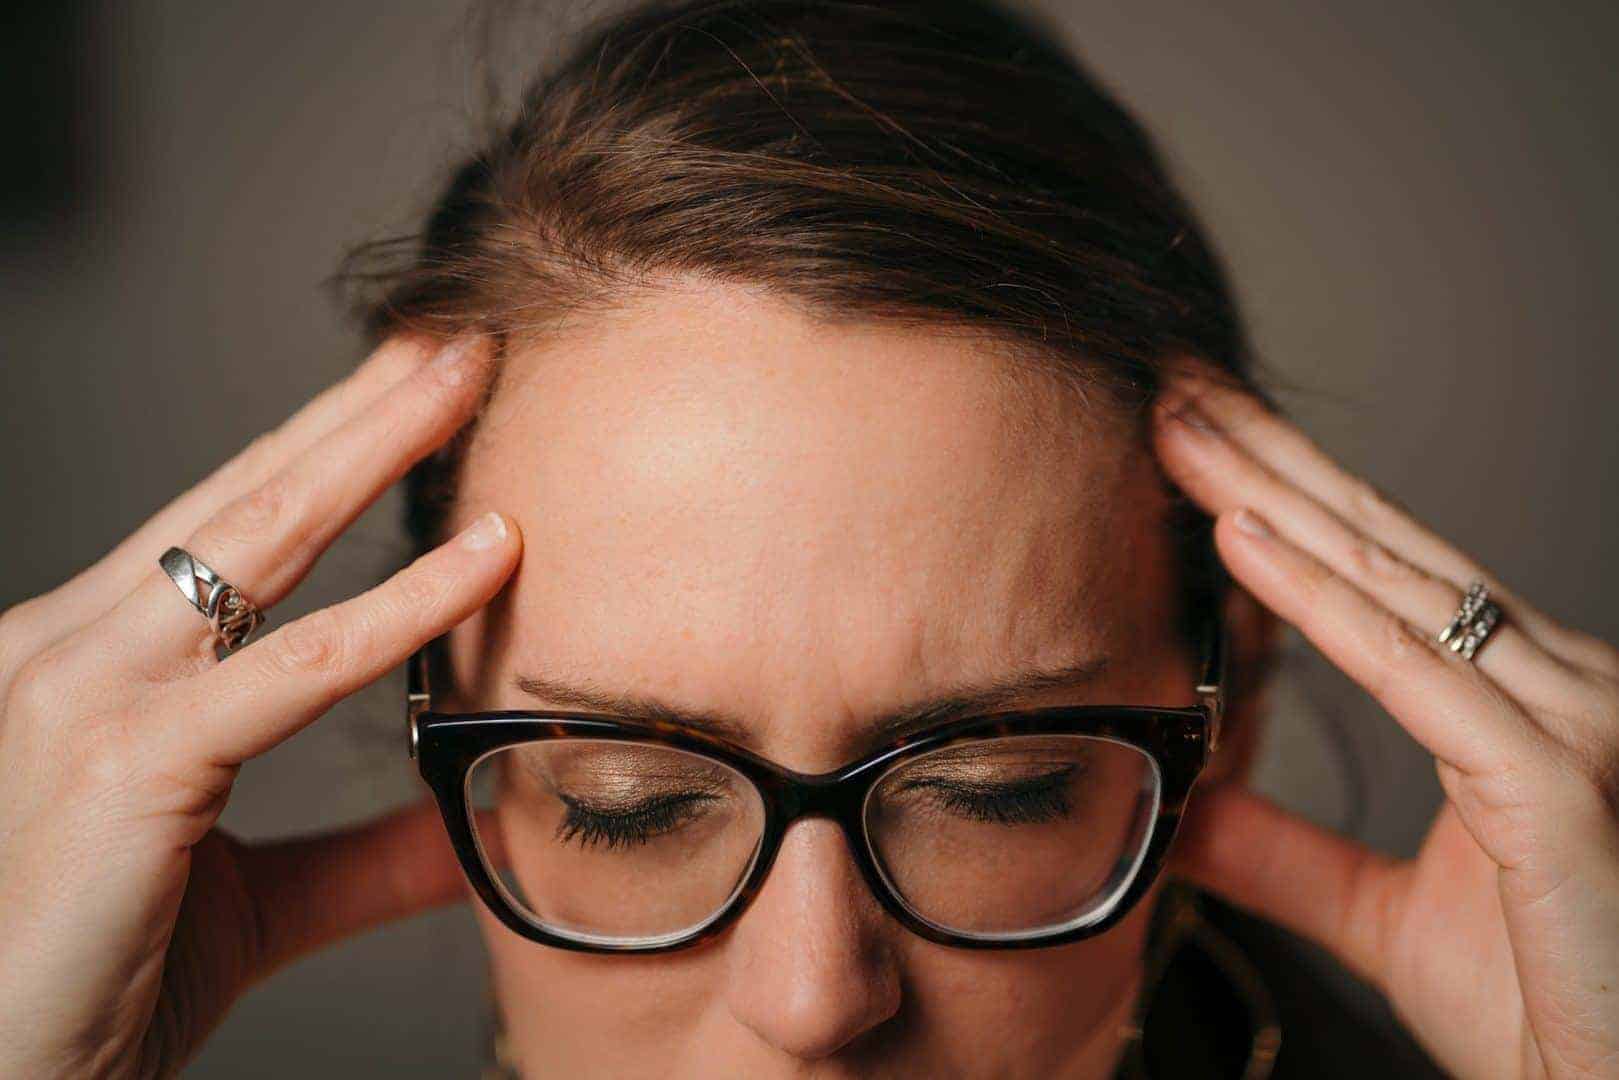 Does CBD Oil Work for Migraines? Benefits & Risks